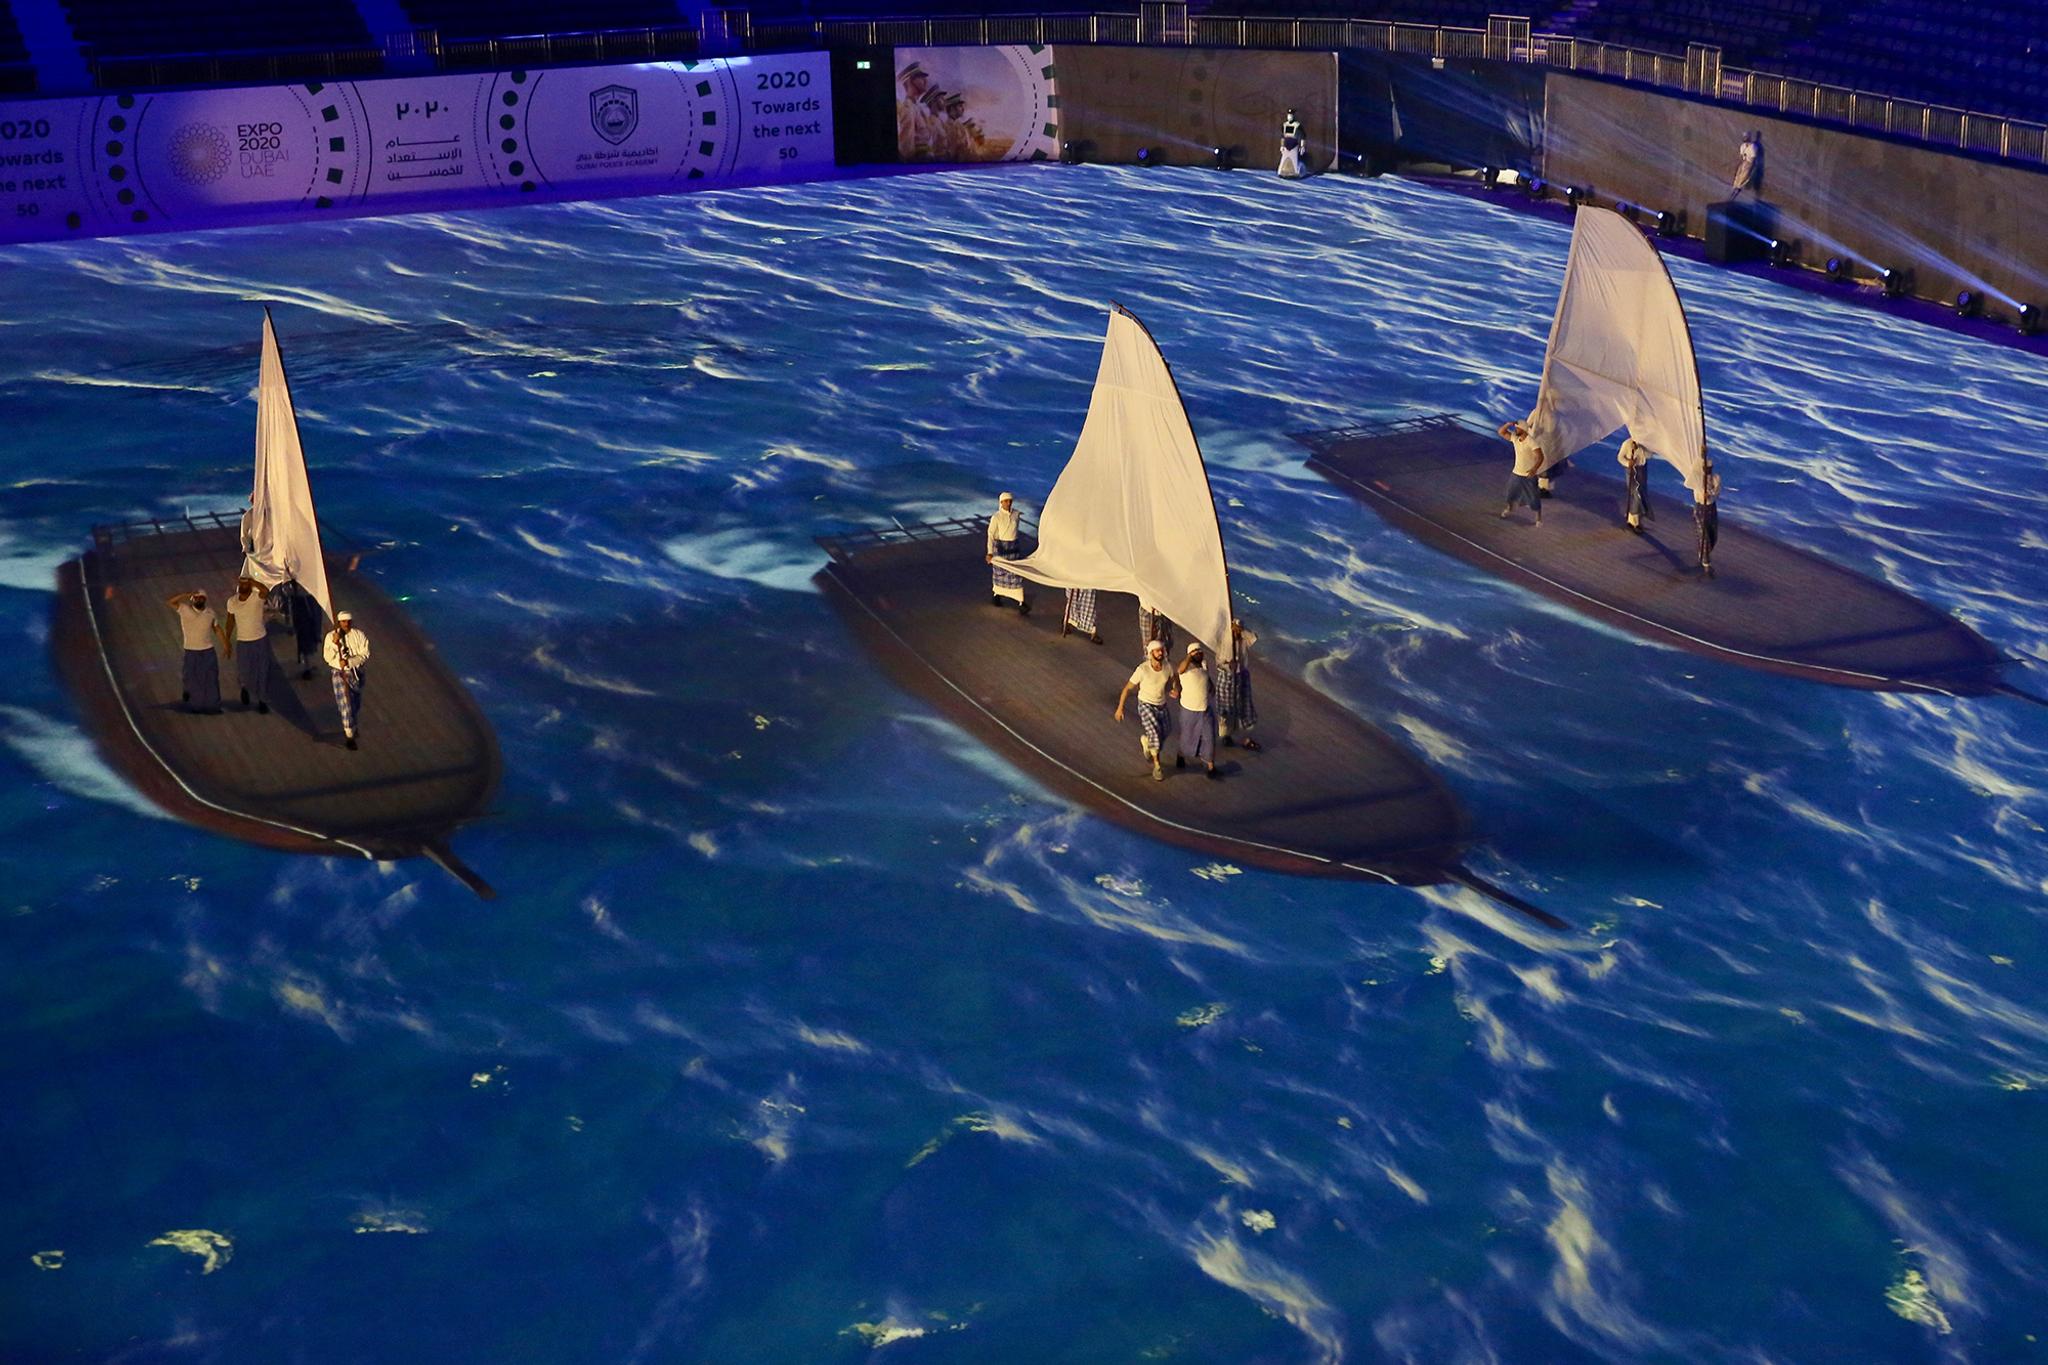 3 groups of men in white shirts hold physical cloth sails on top of video mapped and projected boats and ocean.